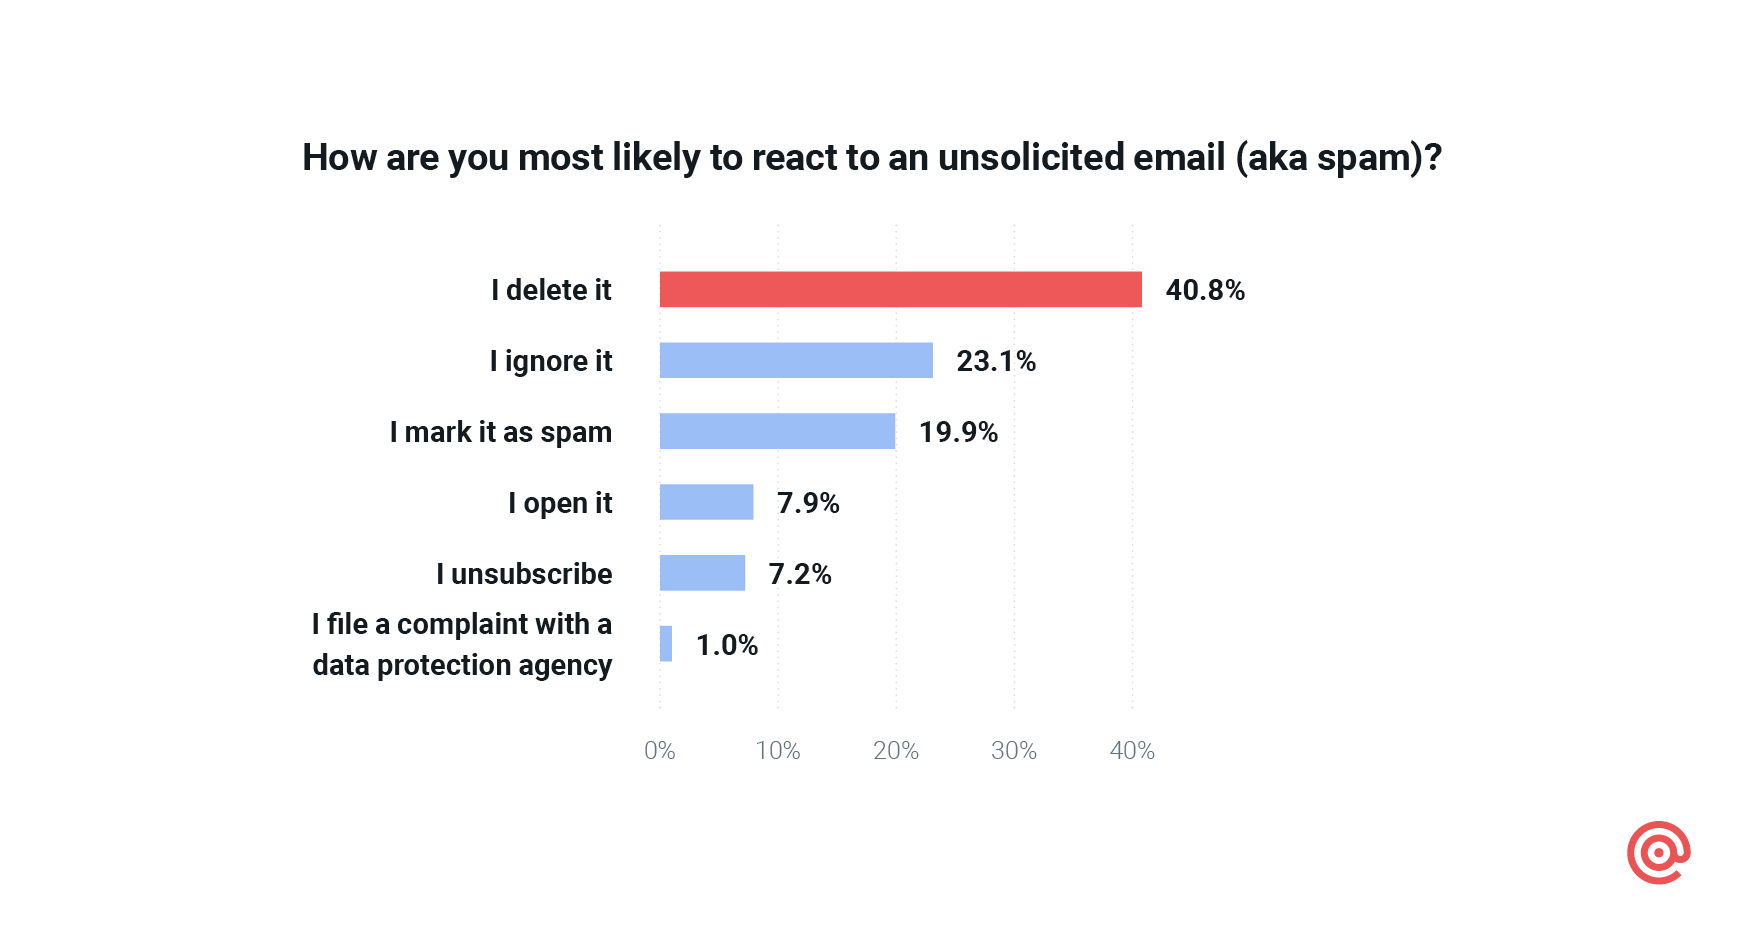 Bar chart showing 40.8% of users would delete unsolicited emails from brands.